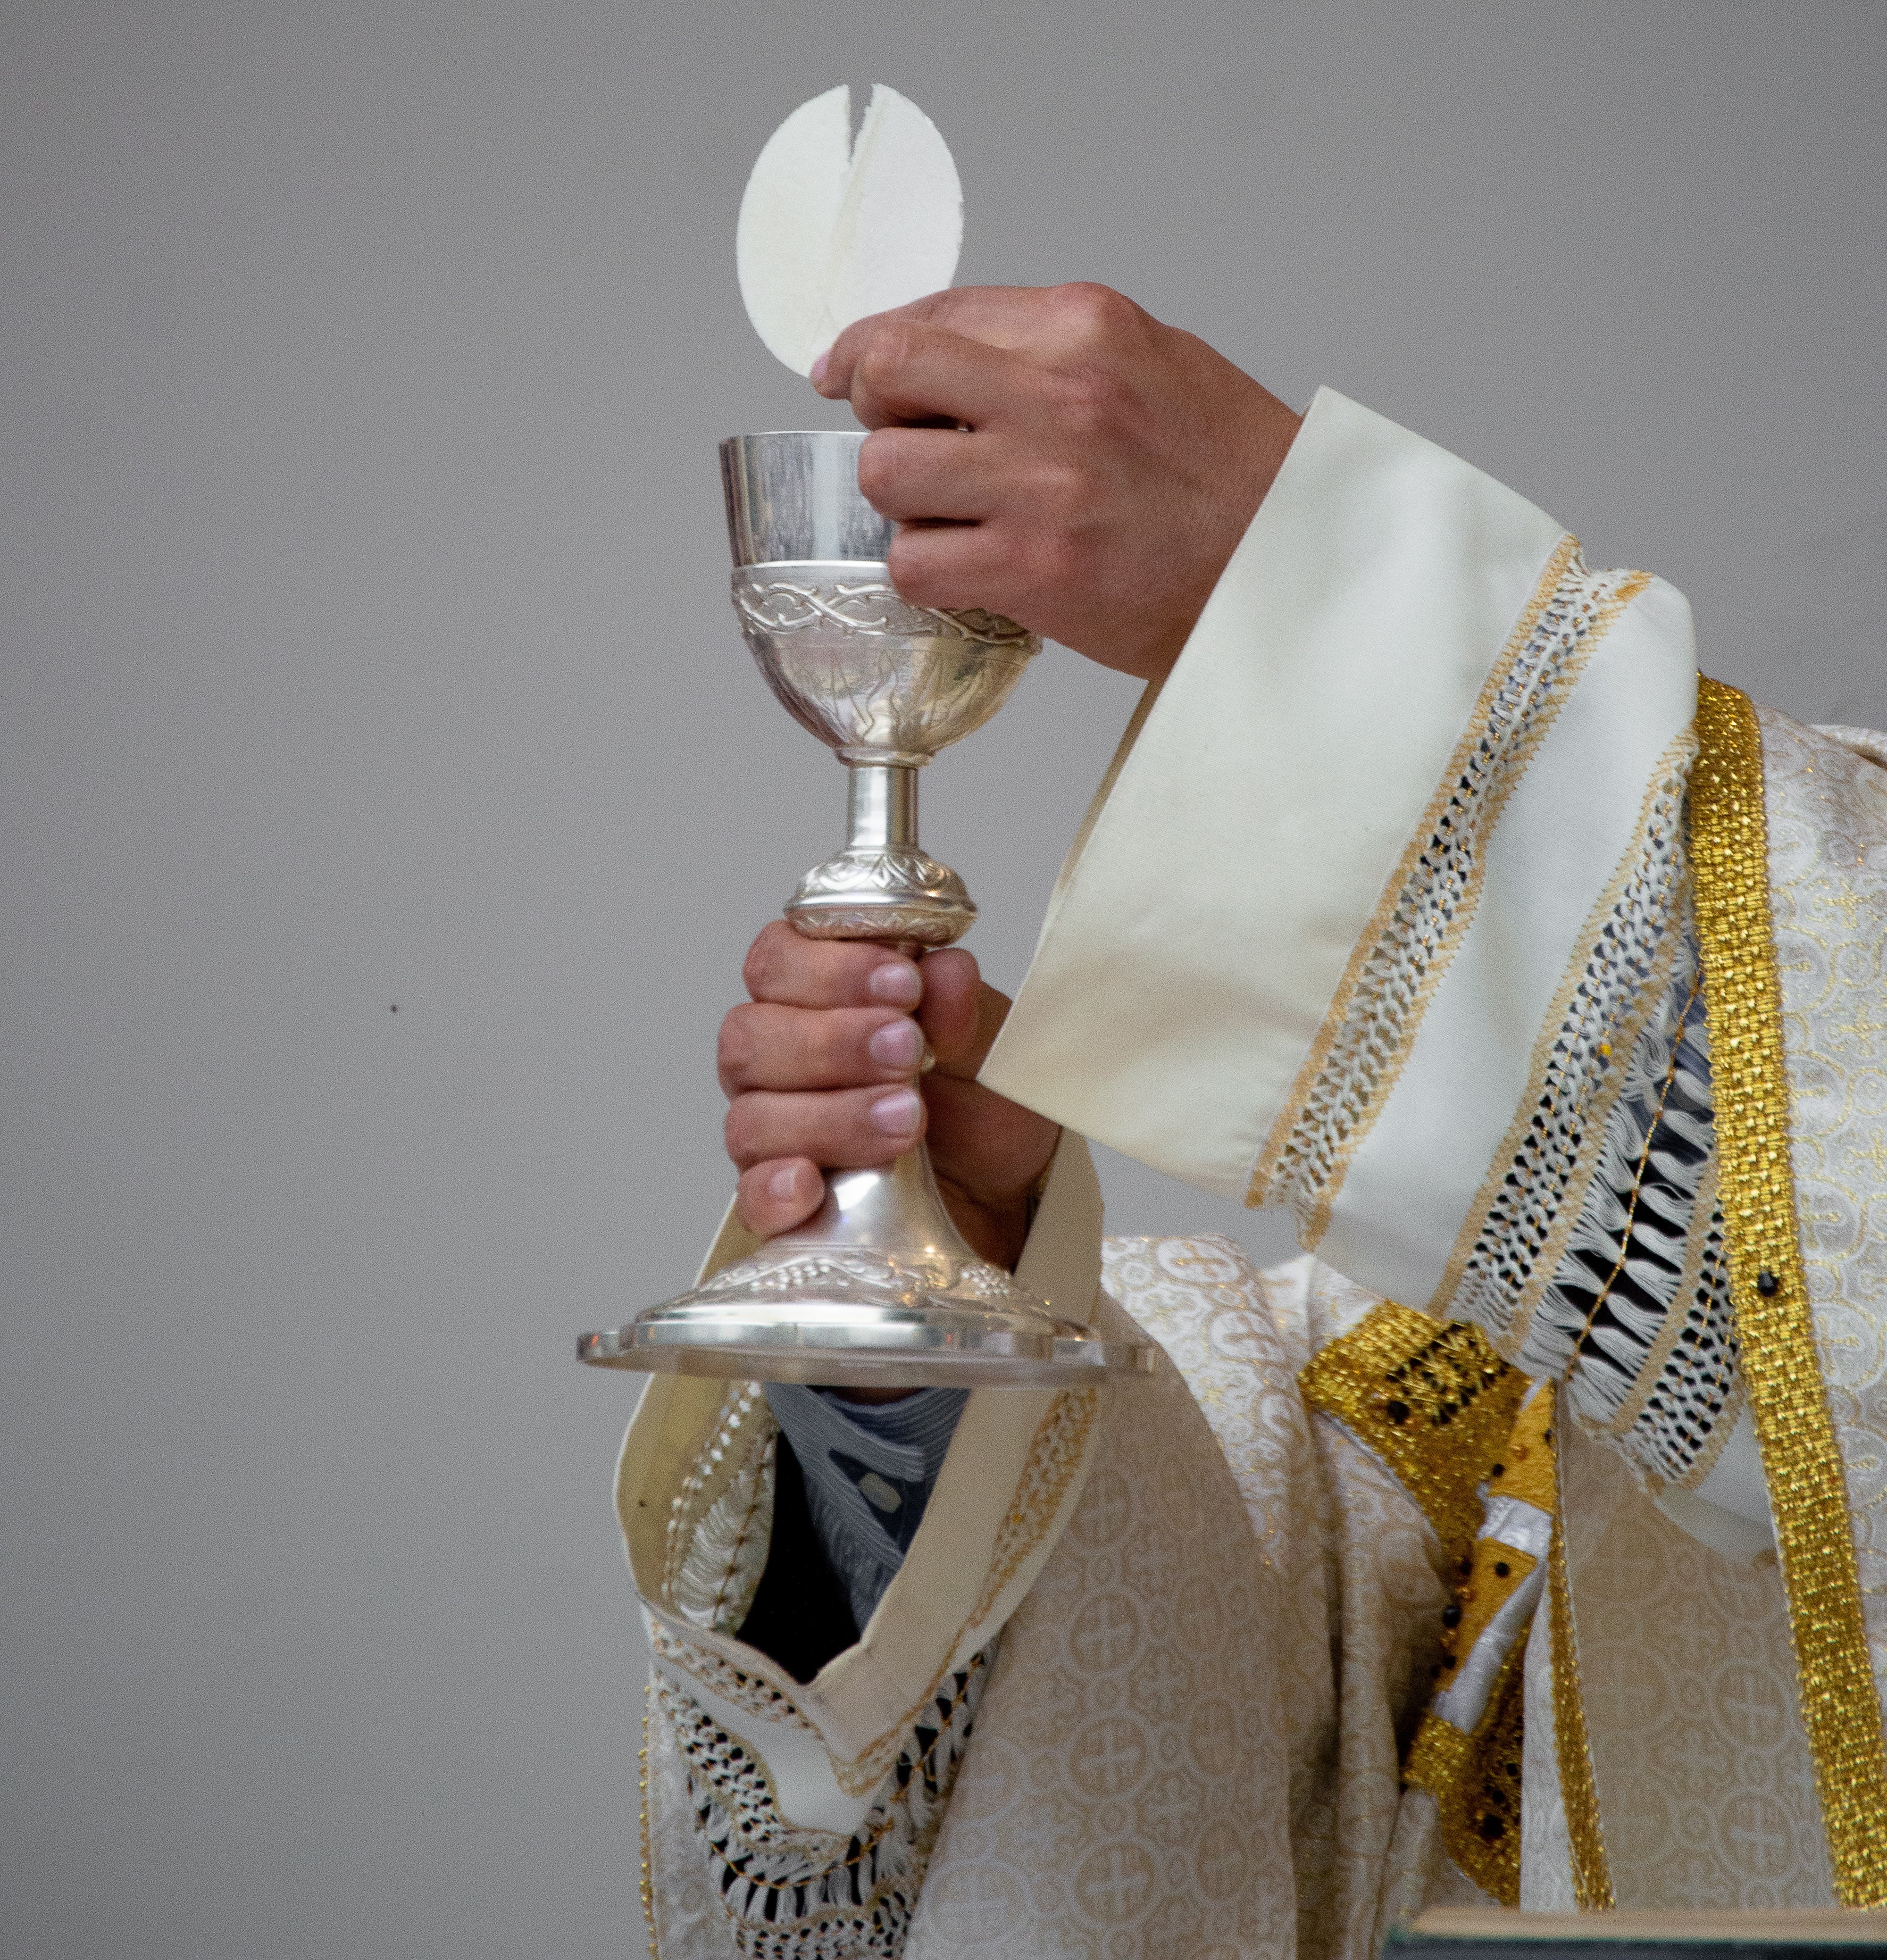 Real Presence in the Eucharist